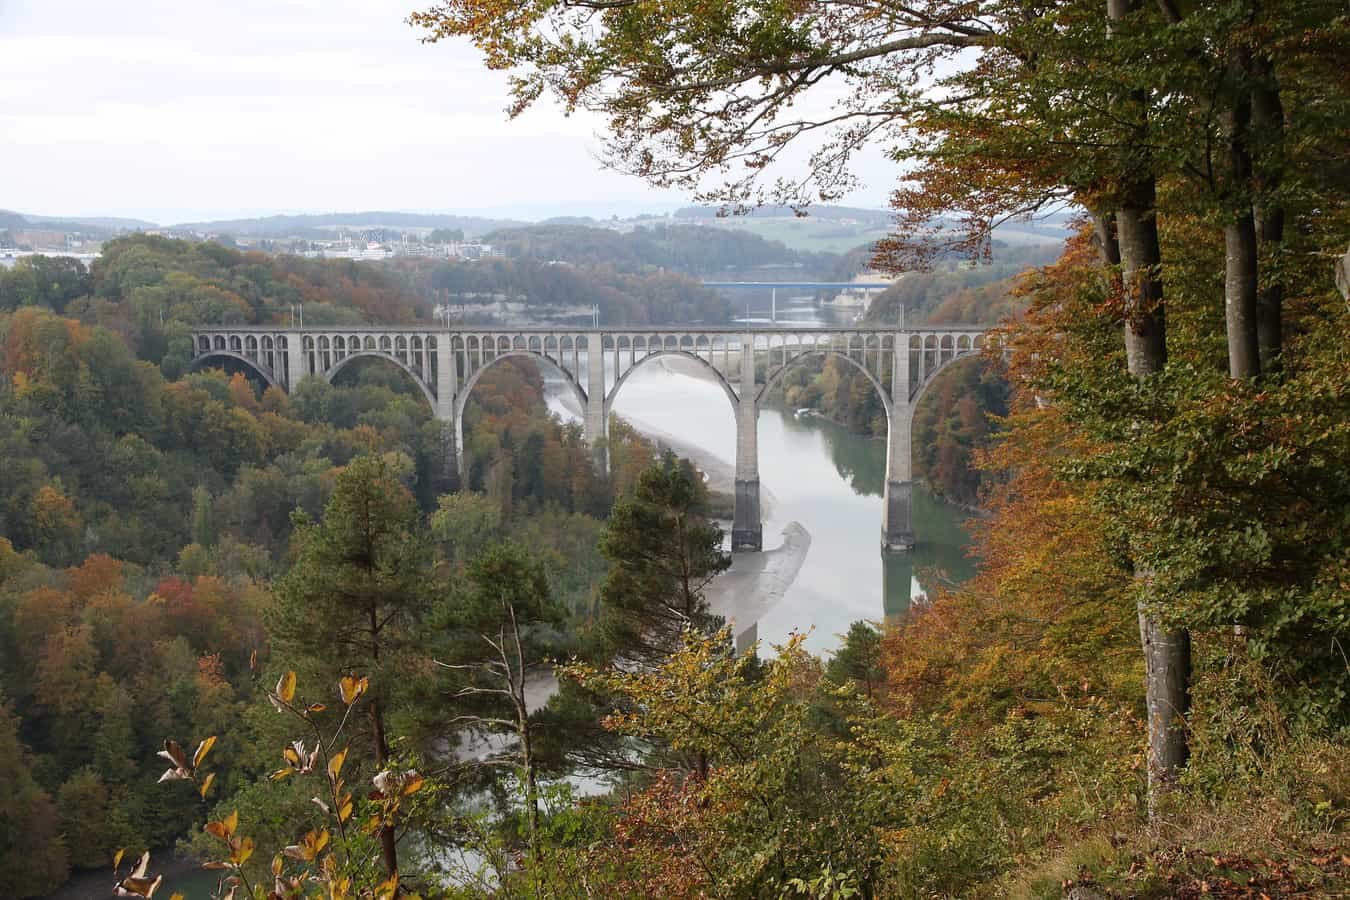 The Grandfey Viaduct over the dammed Saane (Schiffenensee) is used by SBB and BLS trains between Fribourg and Bern at the top and by pedestrians, joggers and cyclists between Fribourg and Düdingen at the bottom.